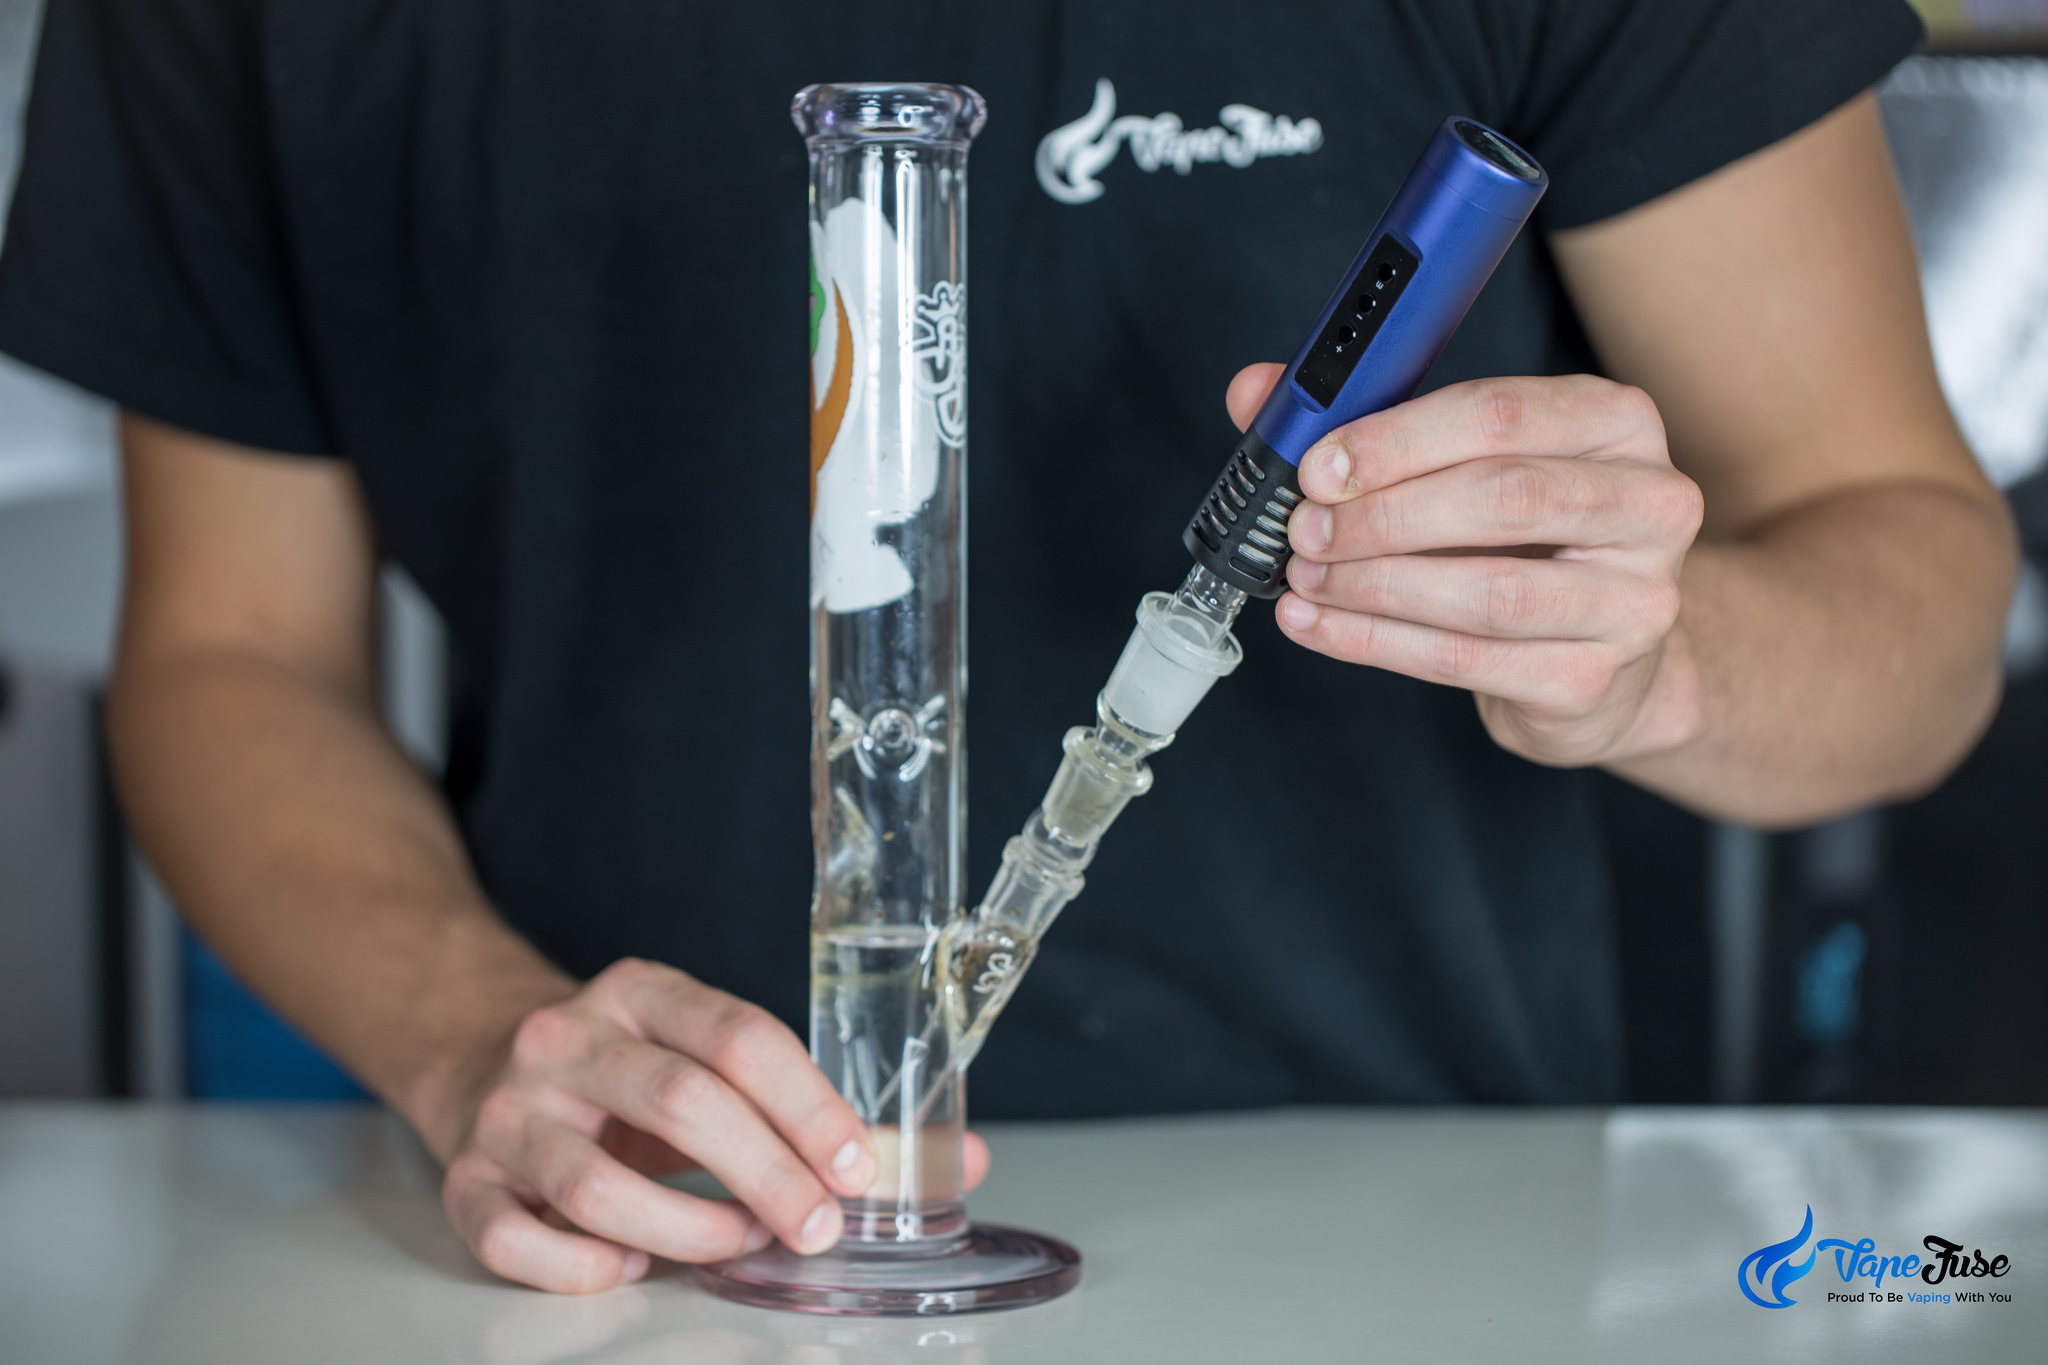 Arizer frosted glass bong attachment in use